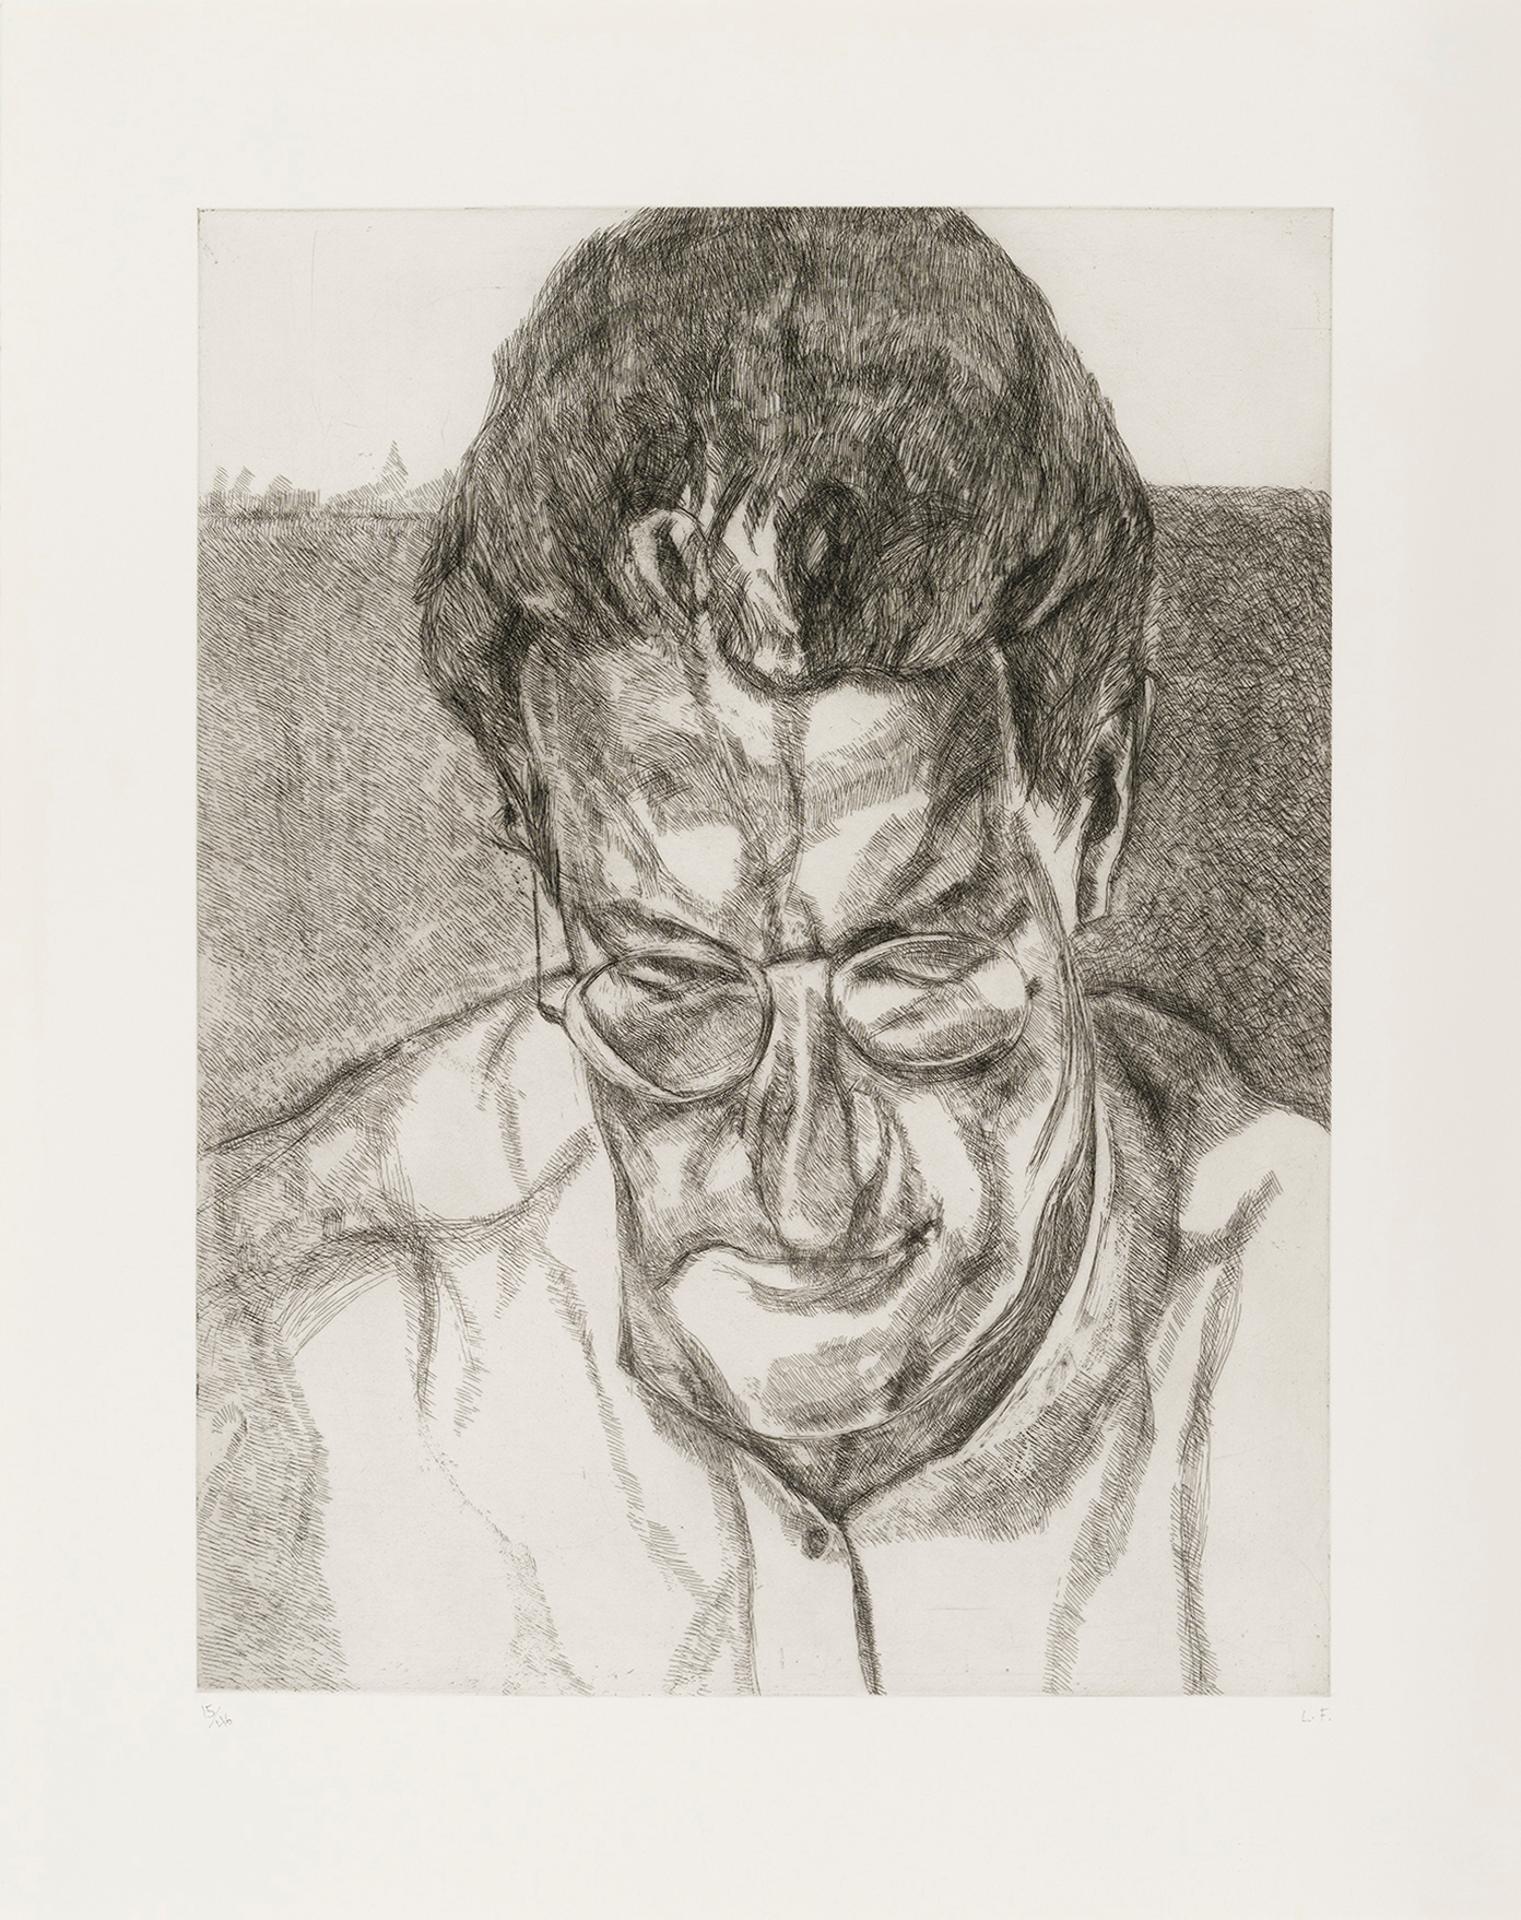 Lucian Freud (1922-2011) - Painter's doctor, 2005-2006